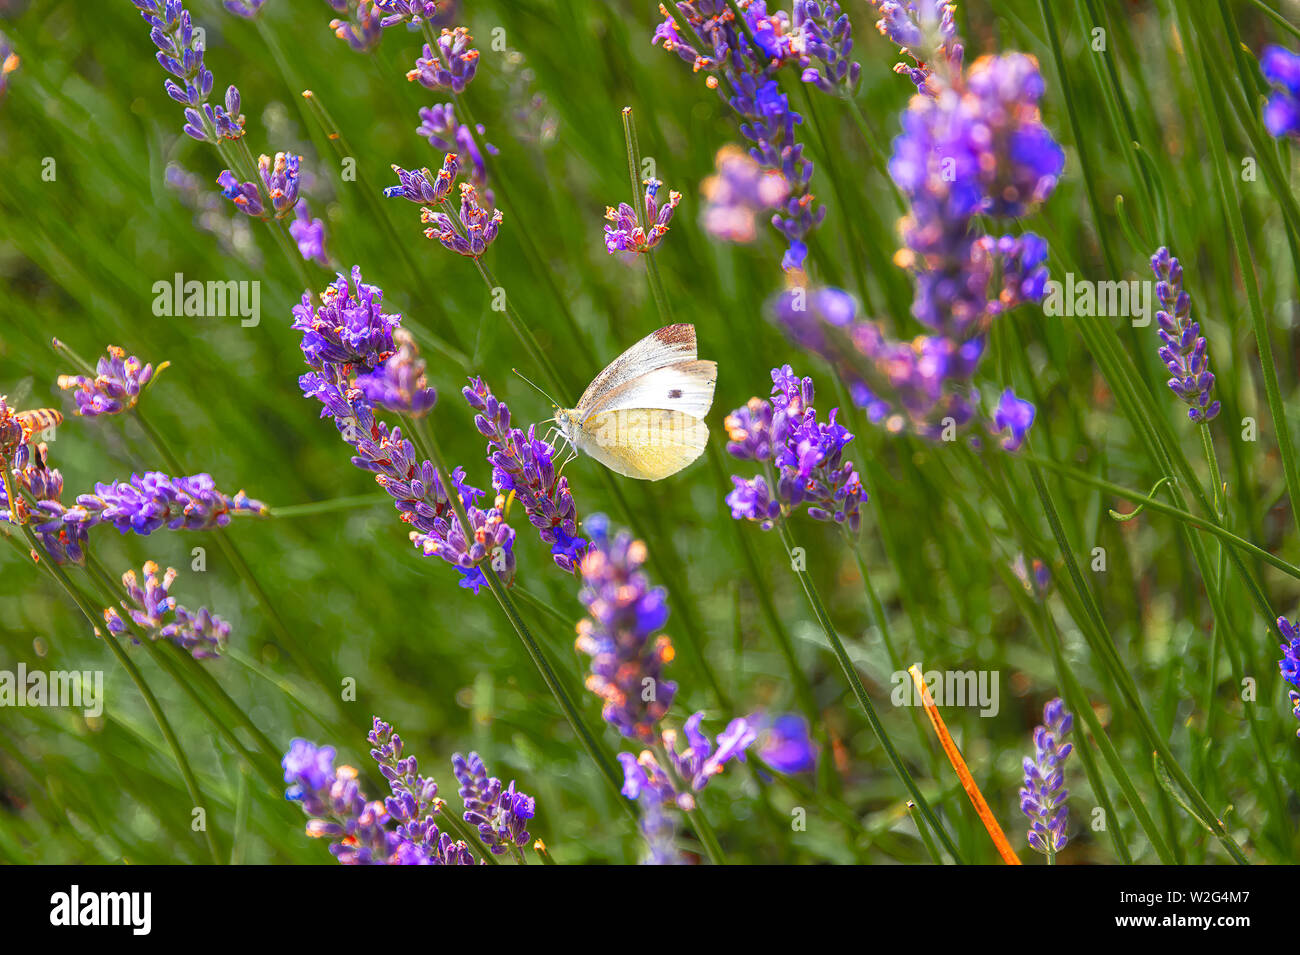 Close-up of Pieridae white butterfly on lavender flower swaying in the wind, taken with shallow depth of field. Stock Photo